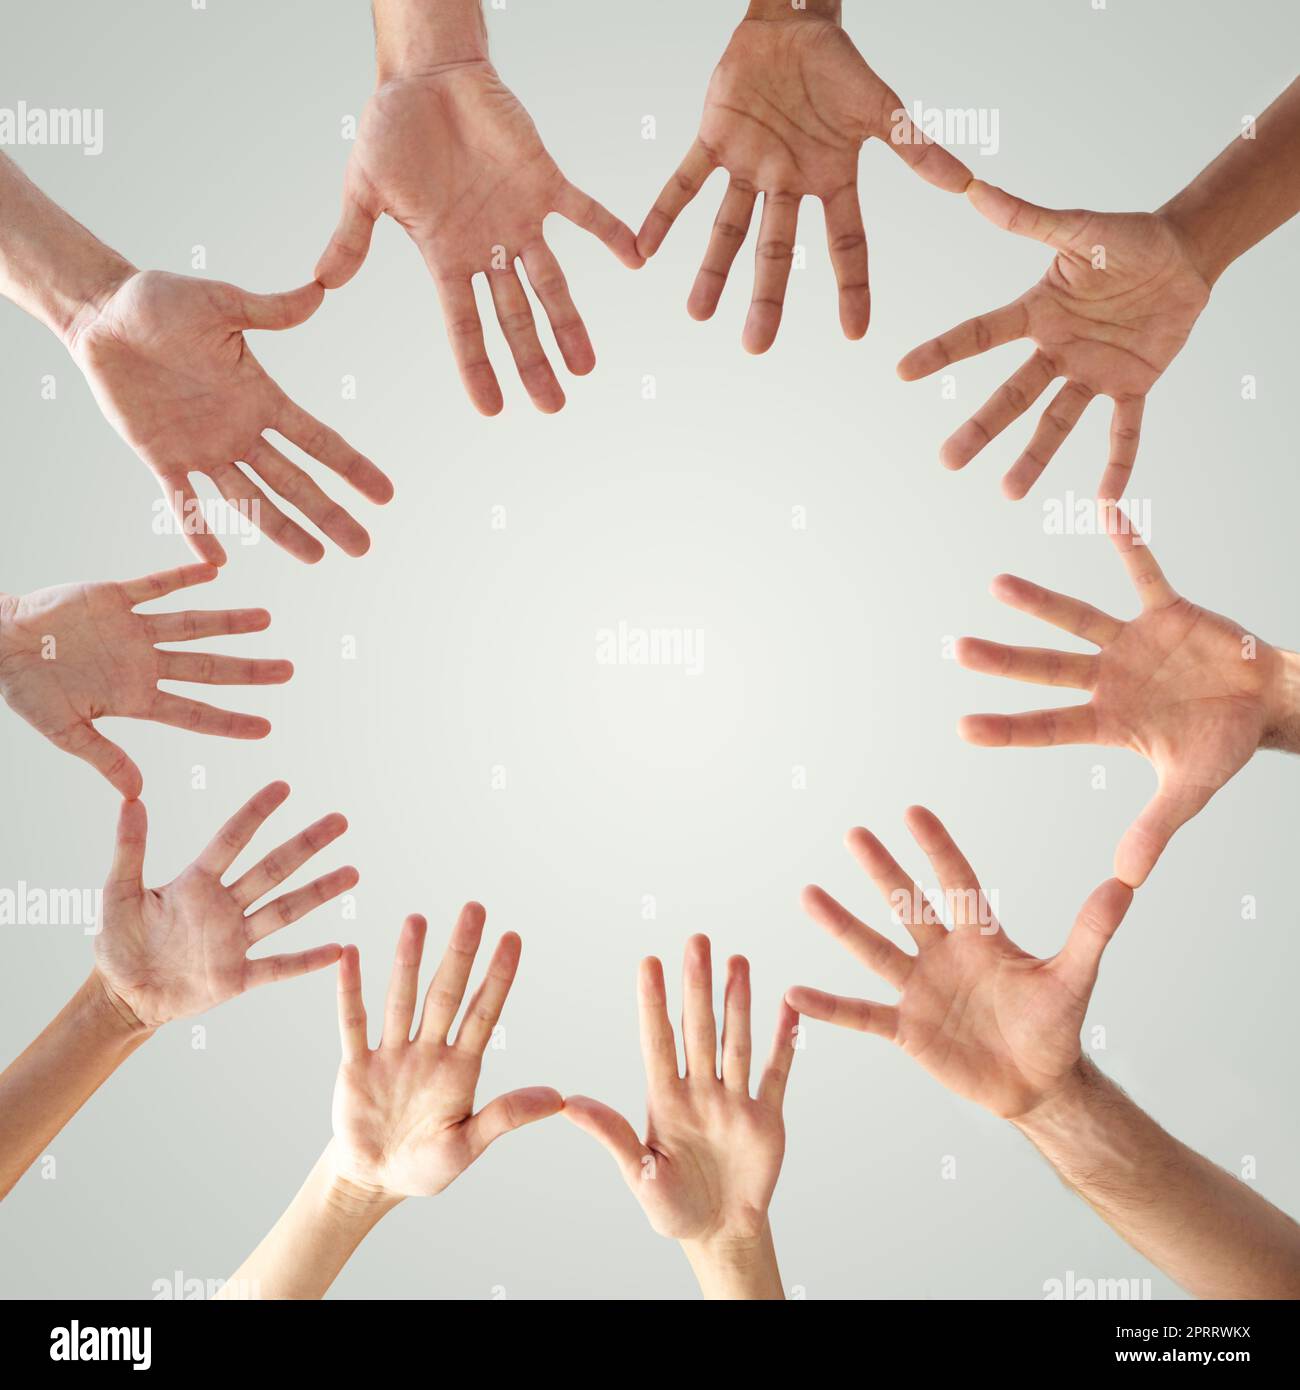 United we stand. Low angle shot of hands in a circle forming a circle. Stock Photo